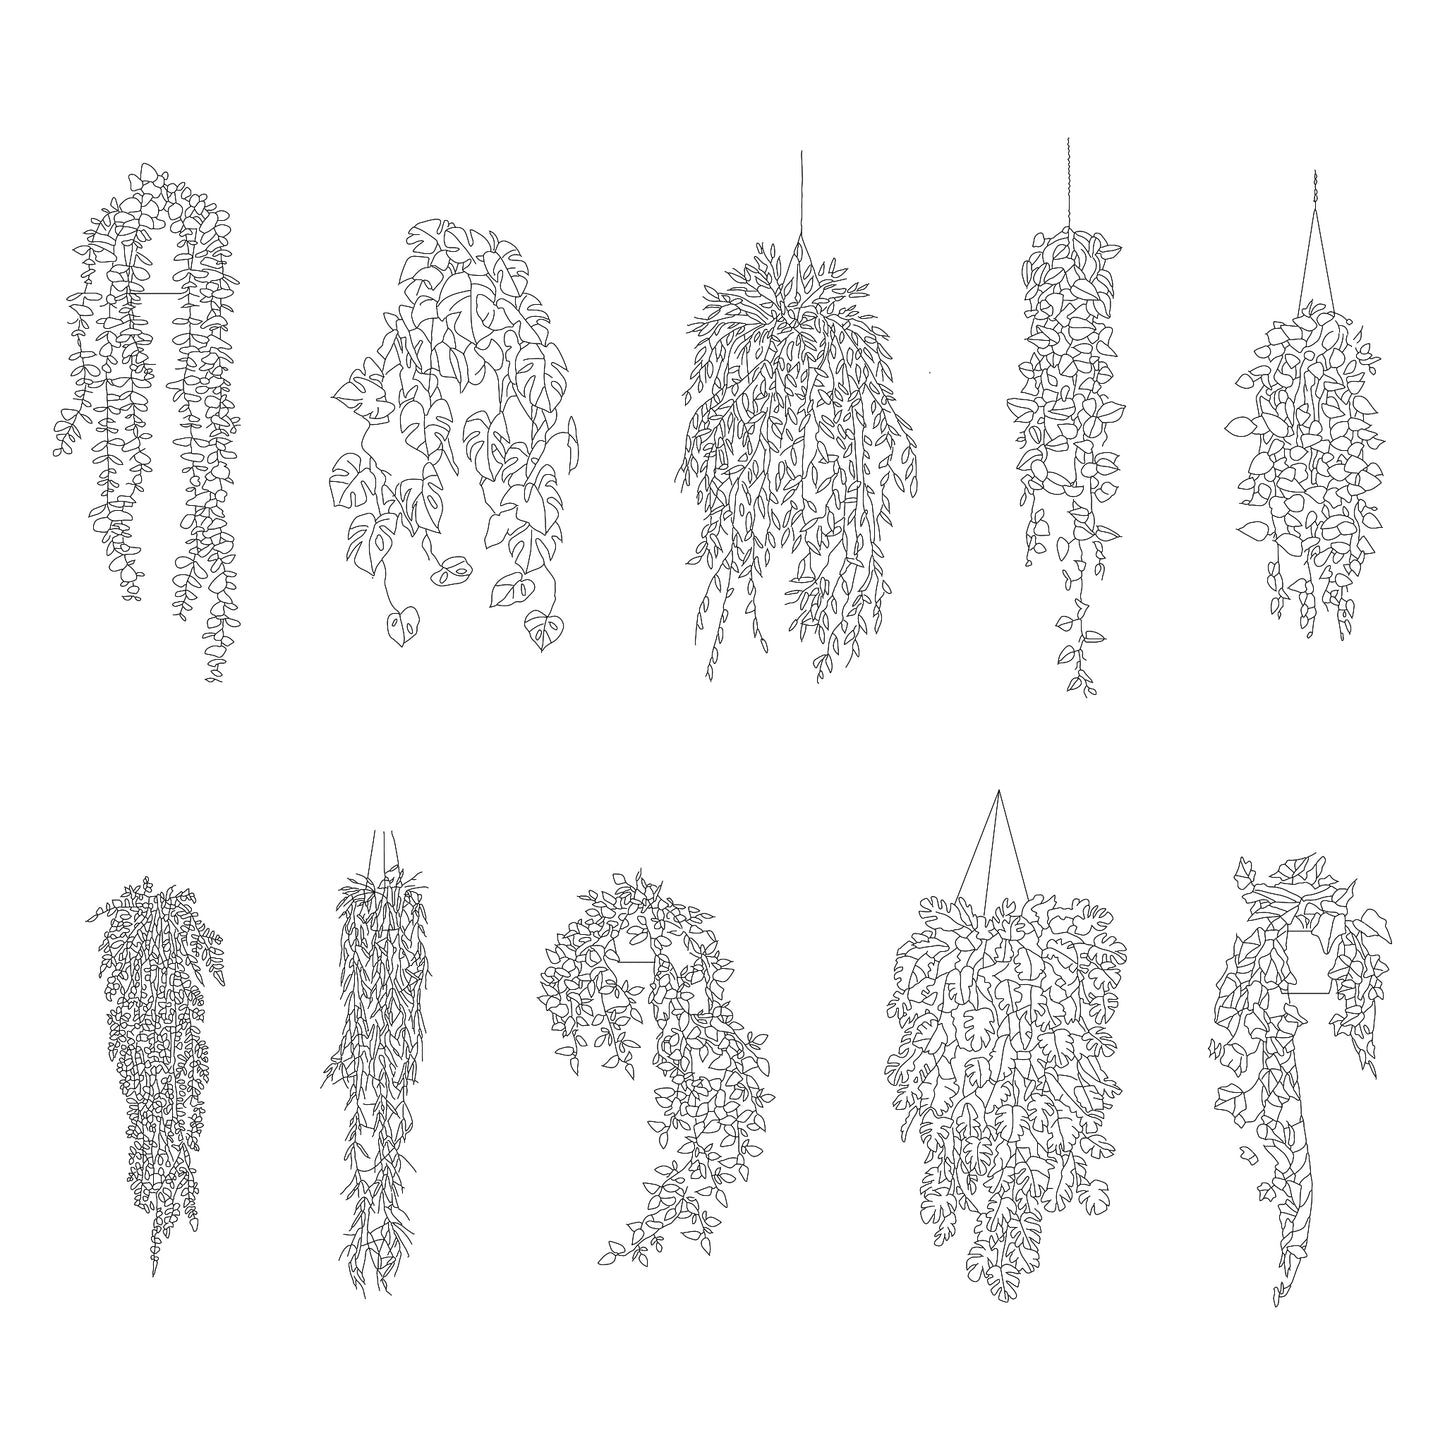 CAD drawing of 10 indoor hanging plants in elevation. Black and white